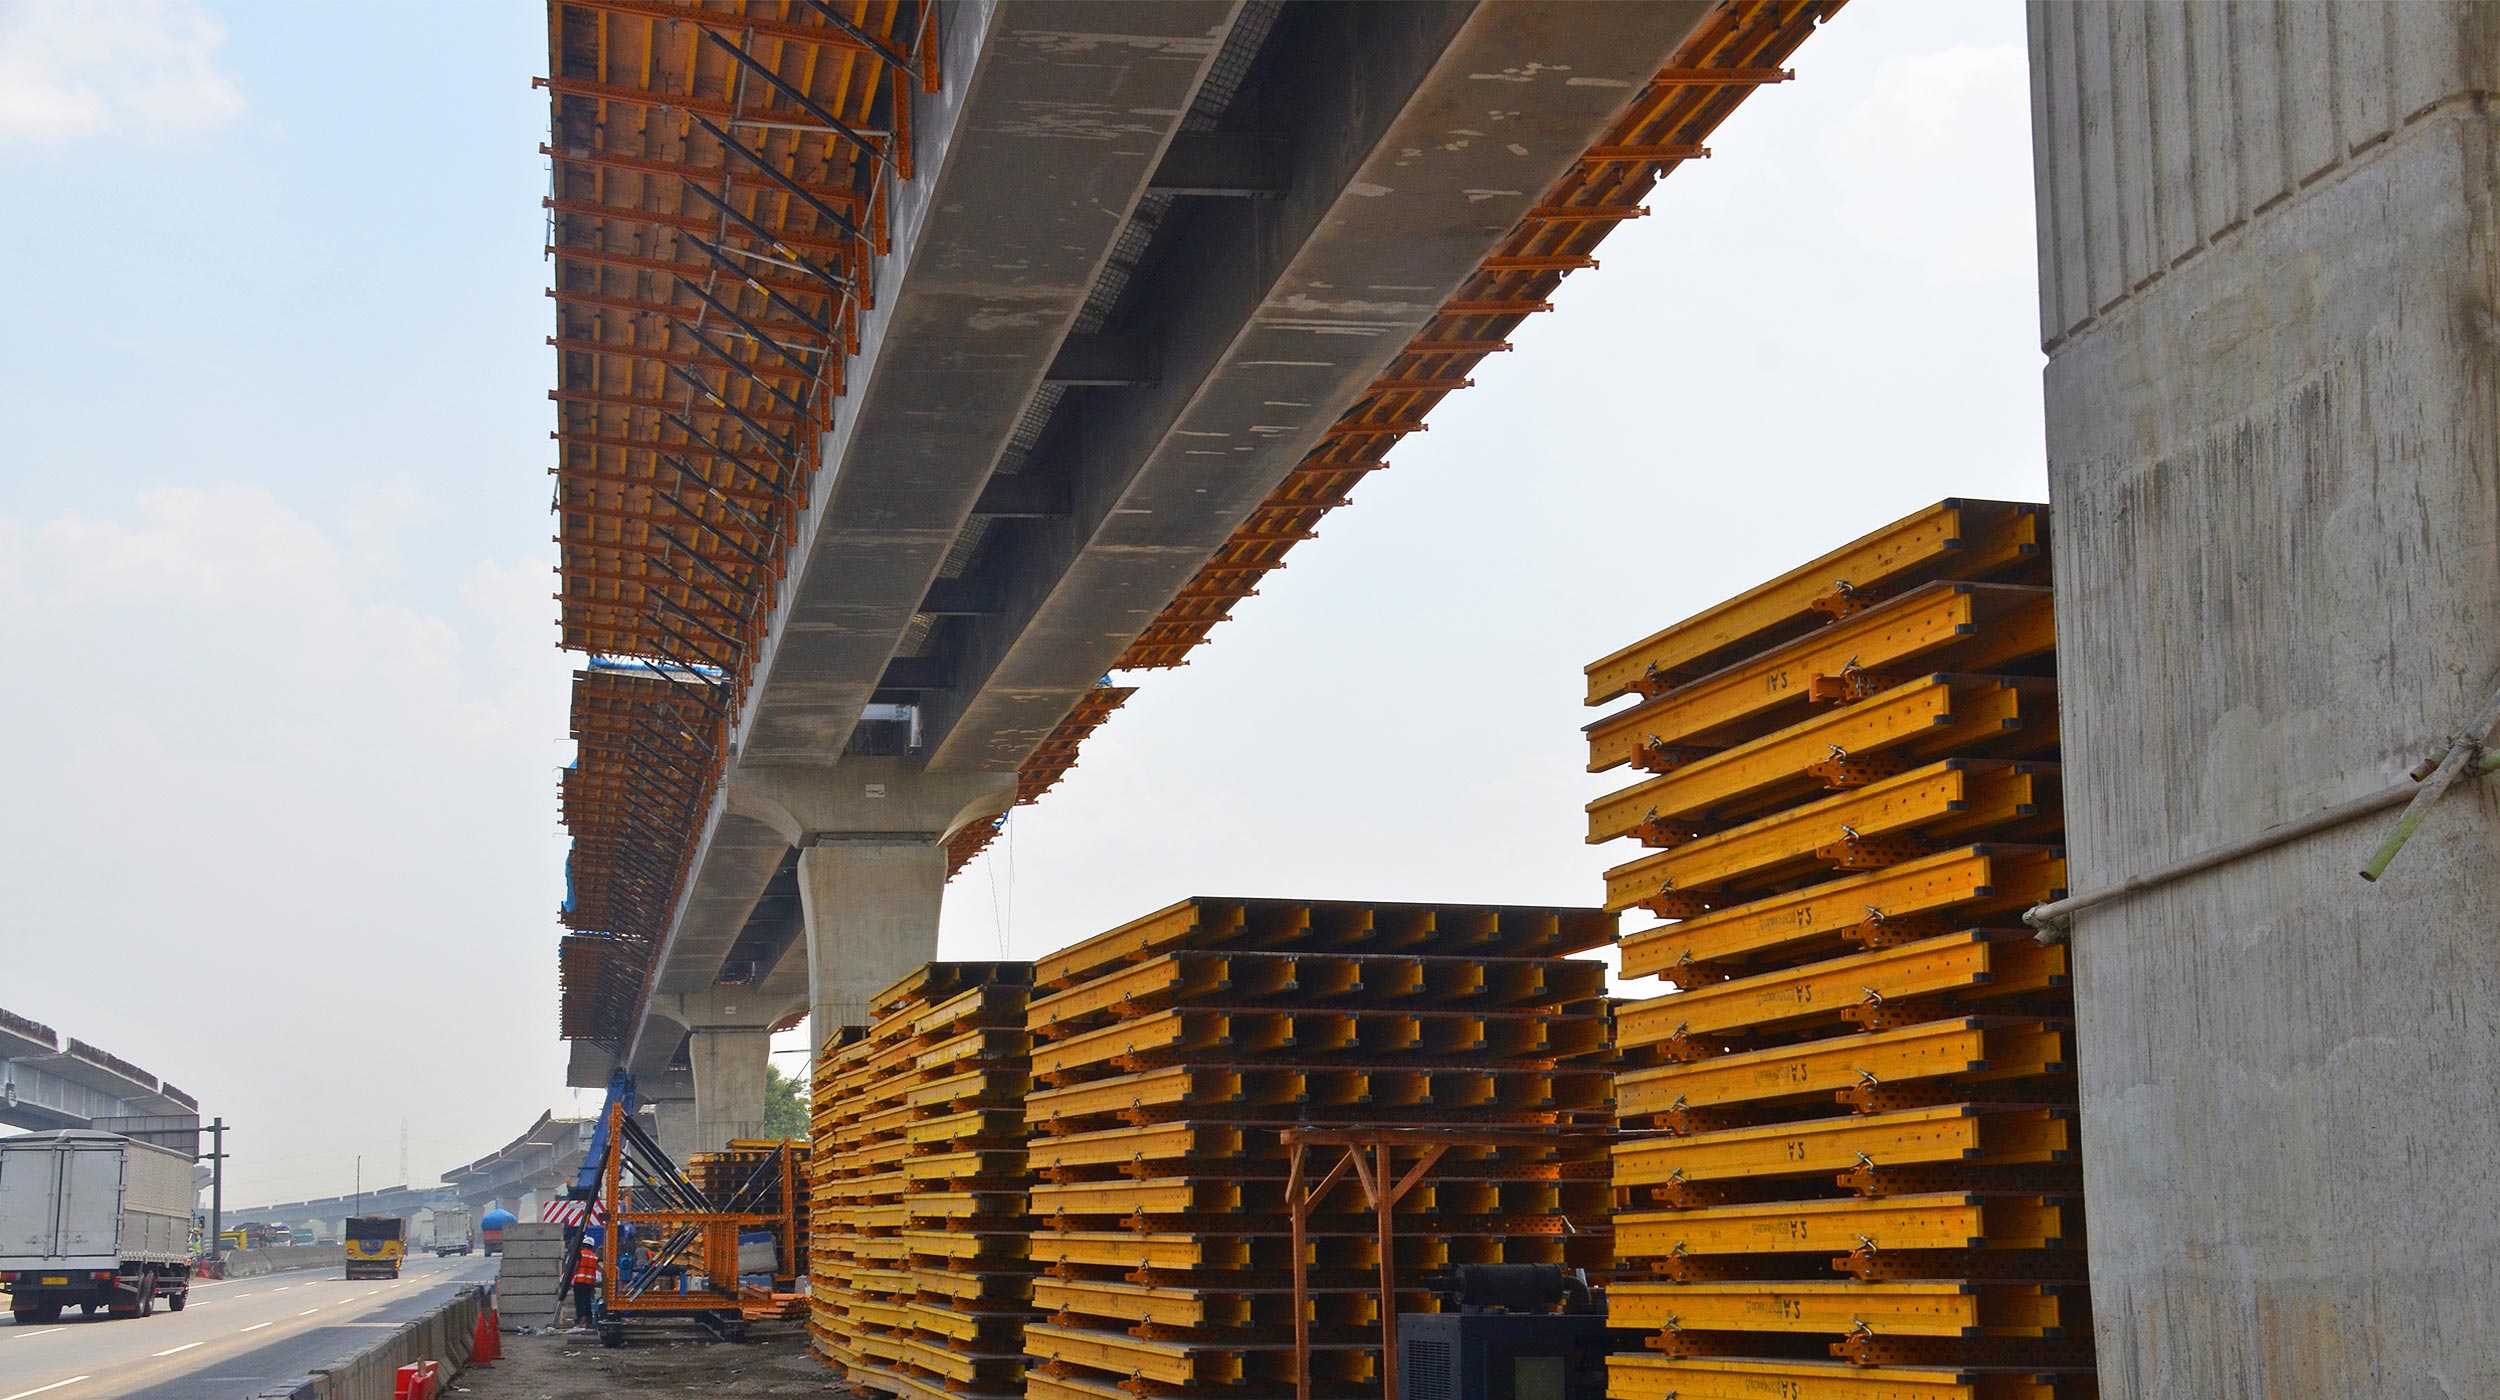 Construction of the new elevated toll road connecting Jakarta and Cikampek, an industrial district in Karawang, West Java.